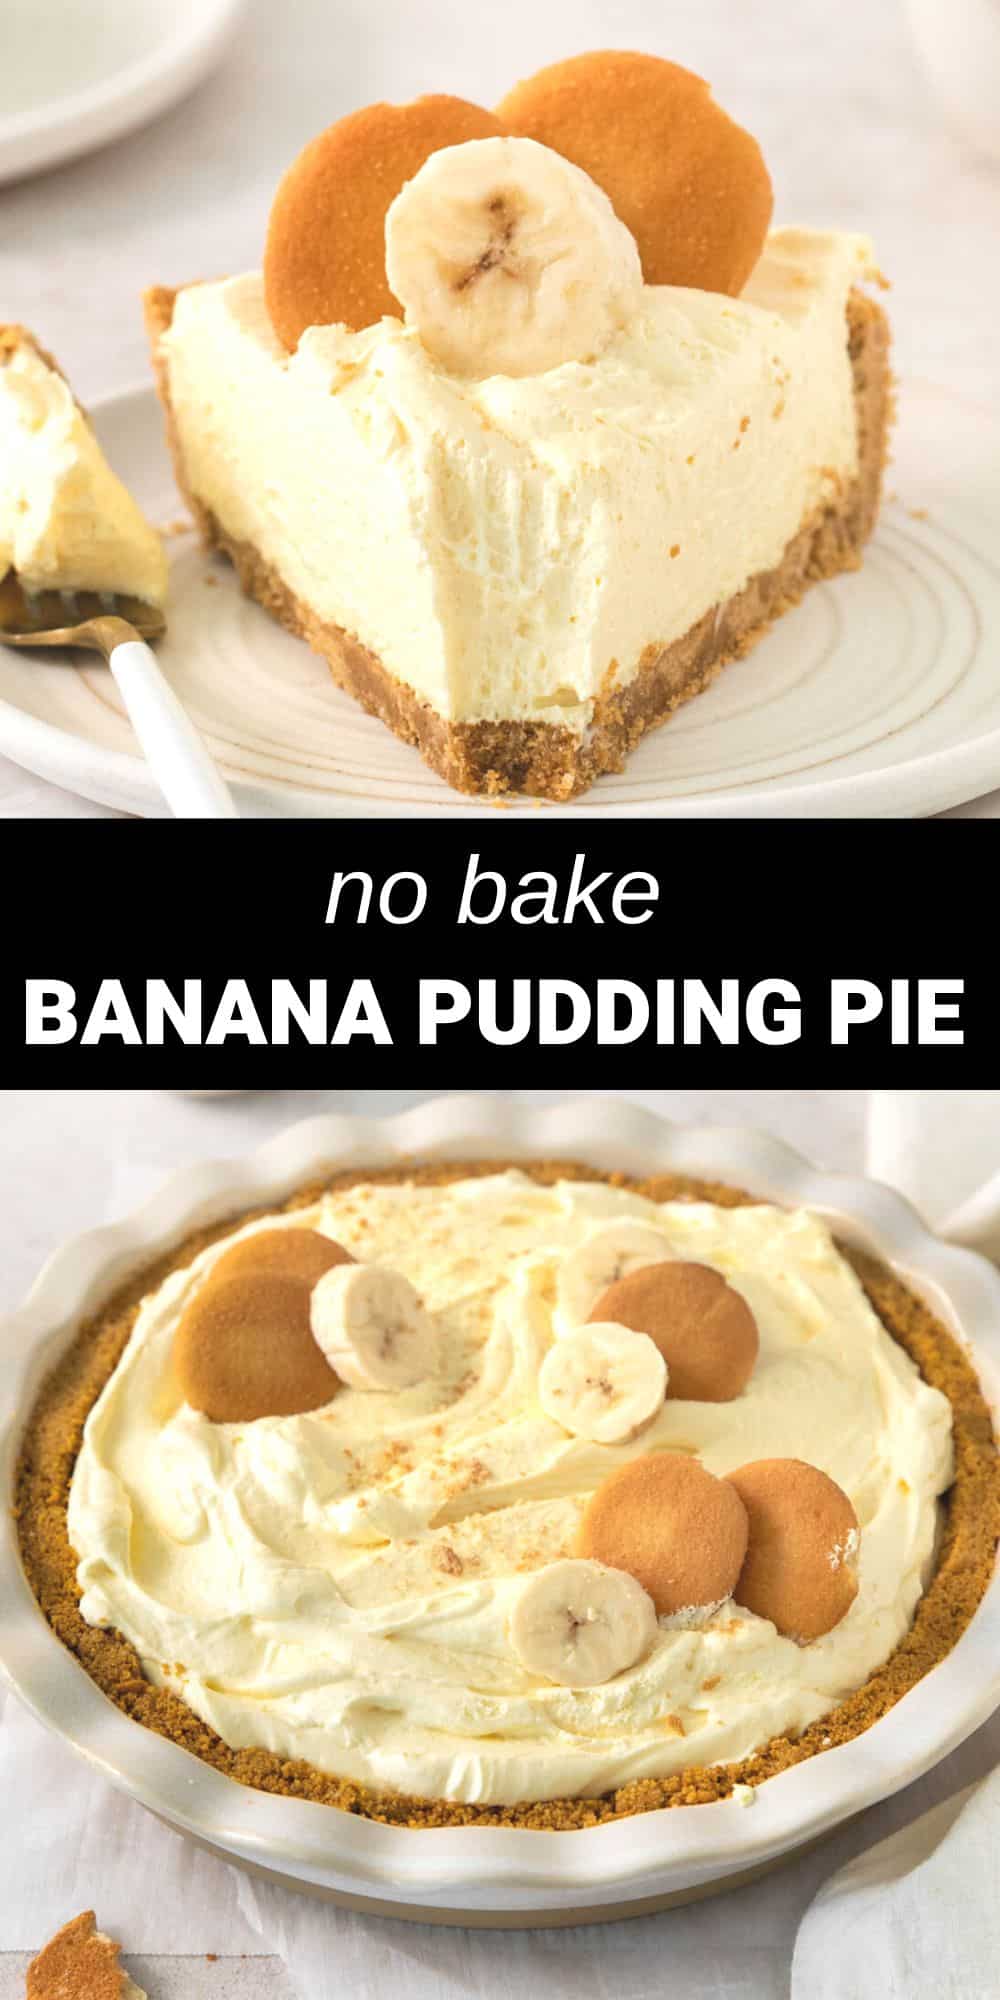 This recipe makes the creamiest, dreamiest Banana Pudding Pie that will have you drooling from the moment you start making it until the very last bite. With a fluffy pudding filling, infused with delicious banana flavor and a homemade, golden brown graham cracker crust, it's the perfect dessert for any occasion.